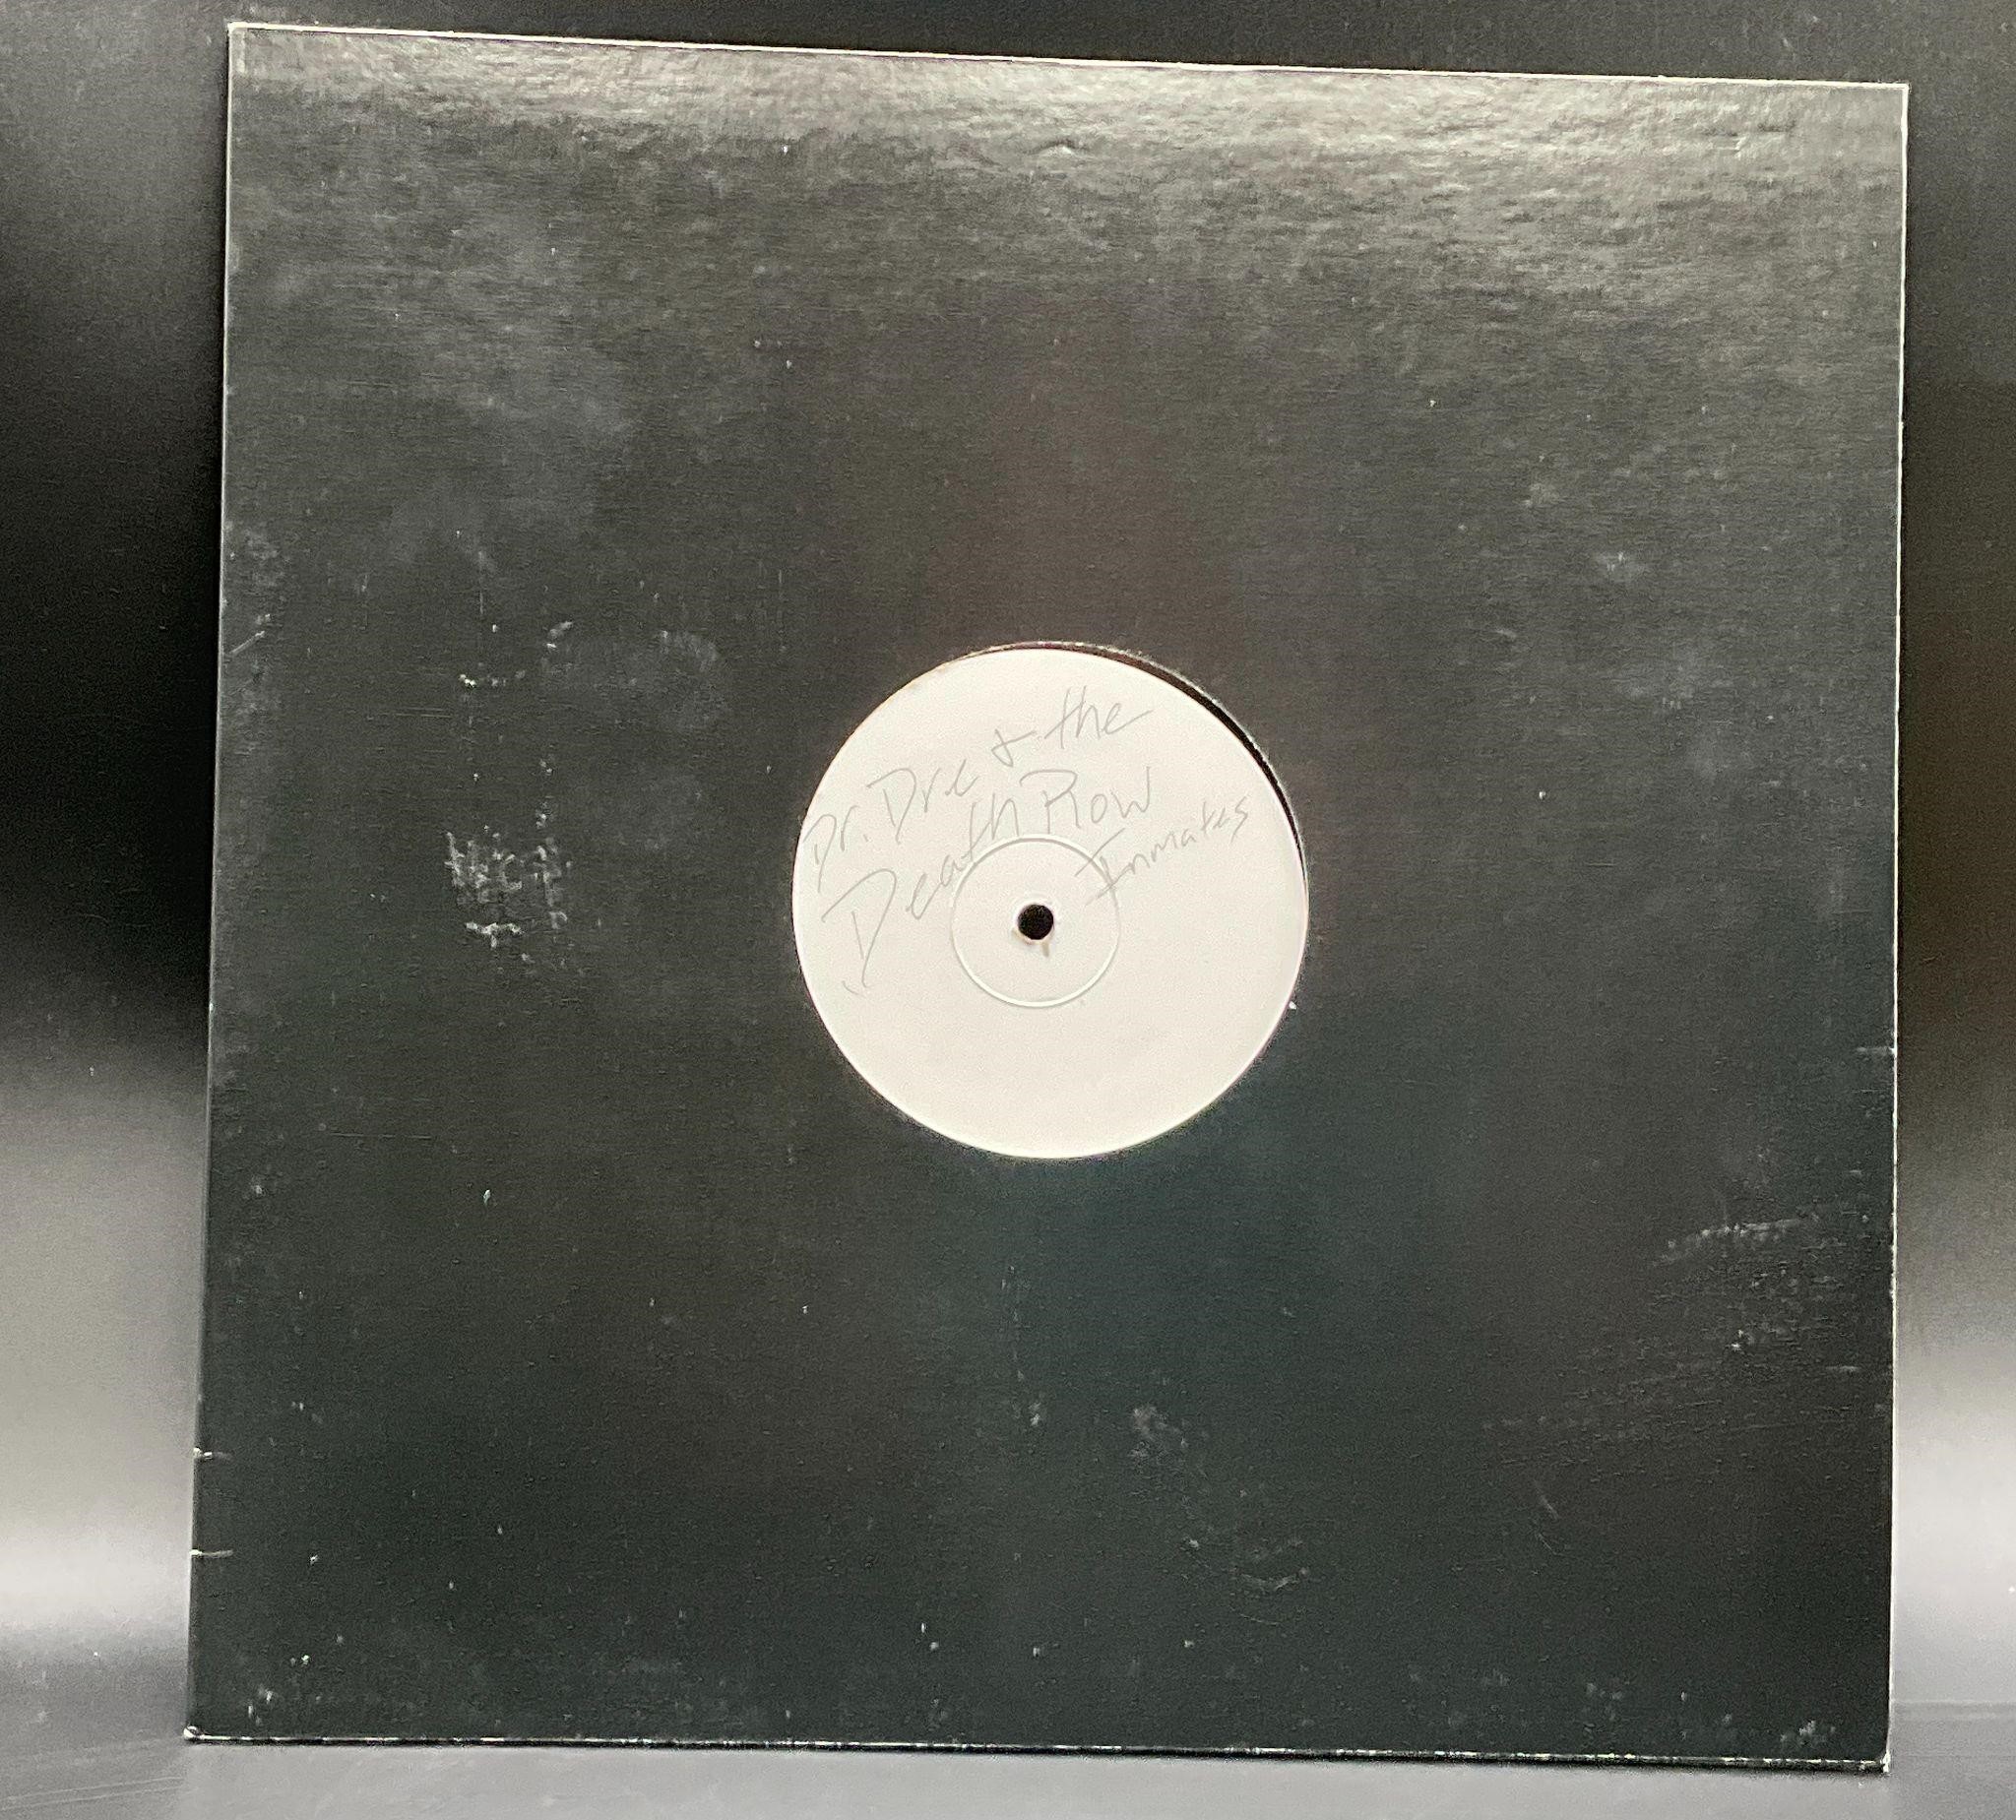 1992  Dr Dre "Nuthin' But A 'G" Thang" Test Press